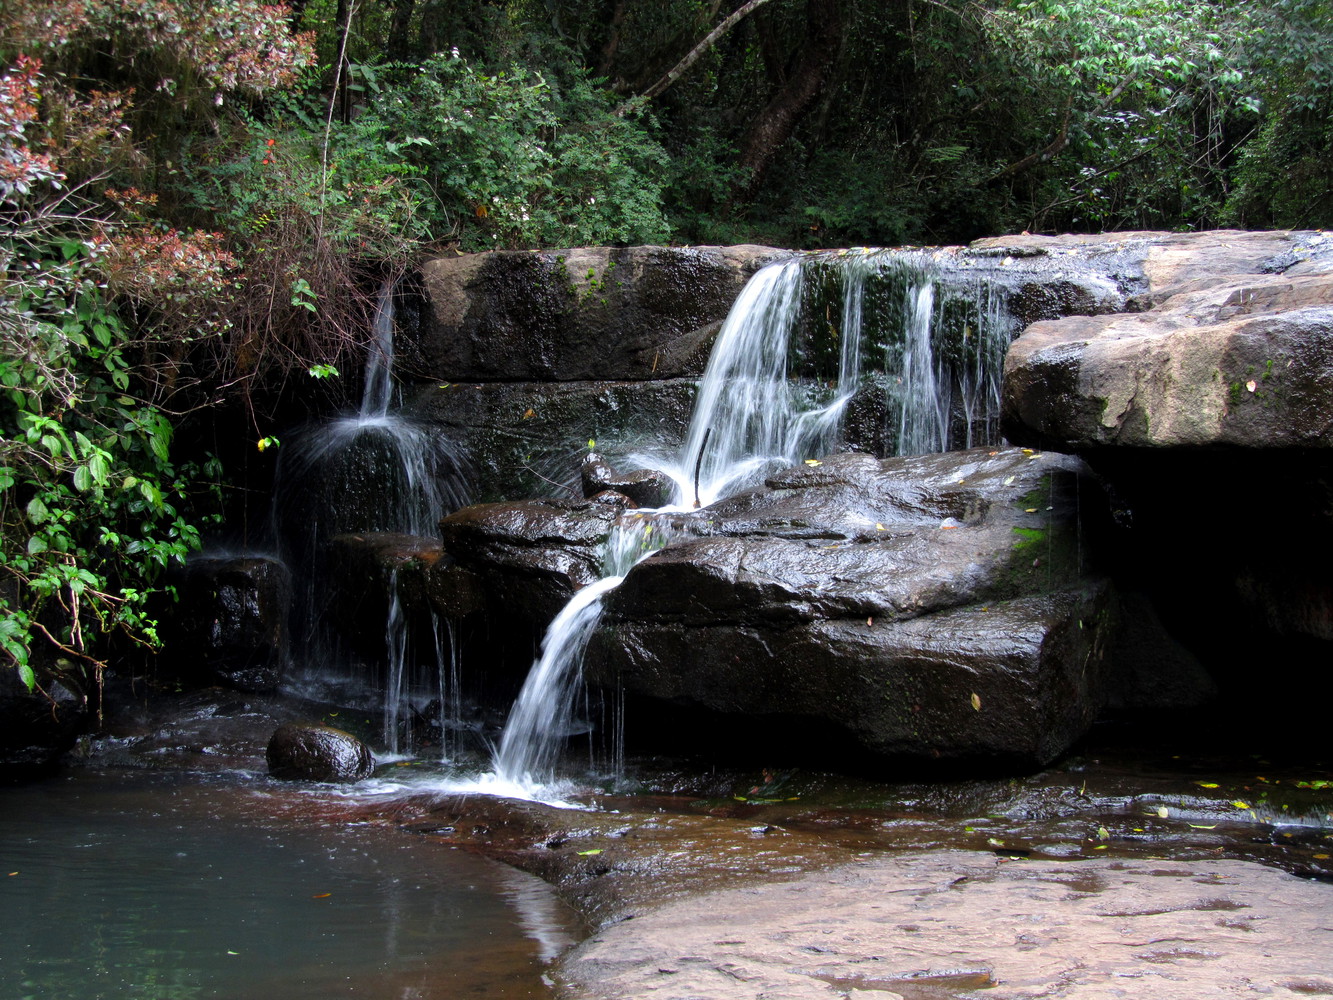 A waterfall descending a series of two rock steps